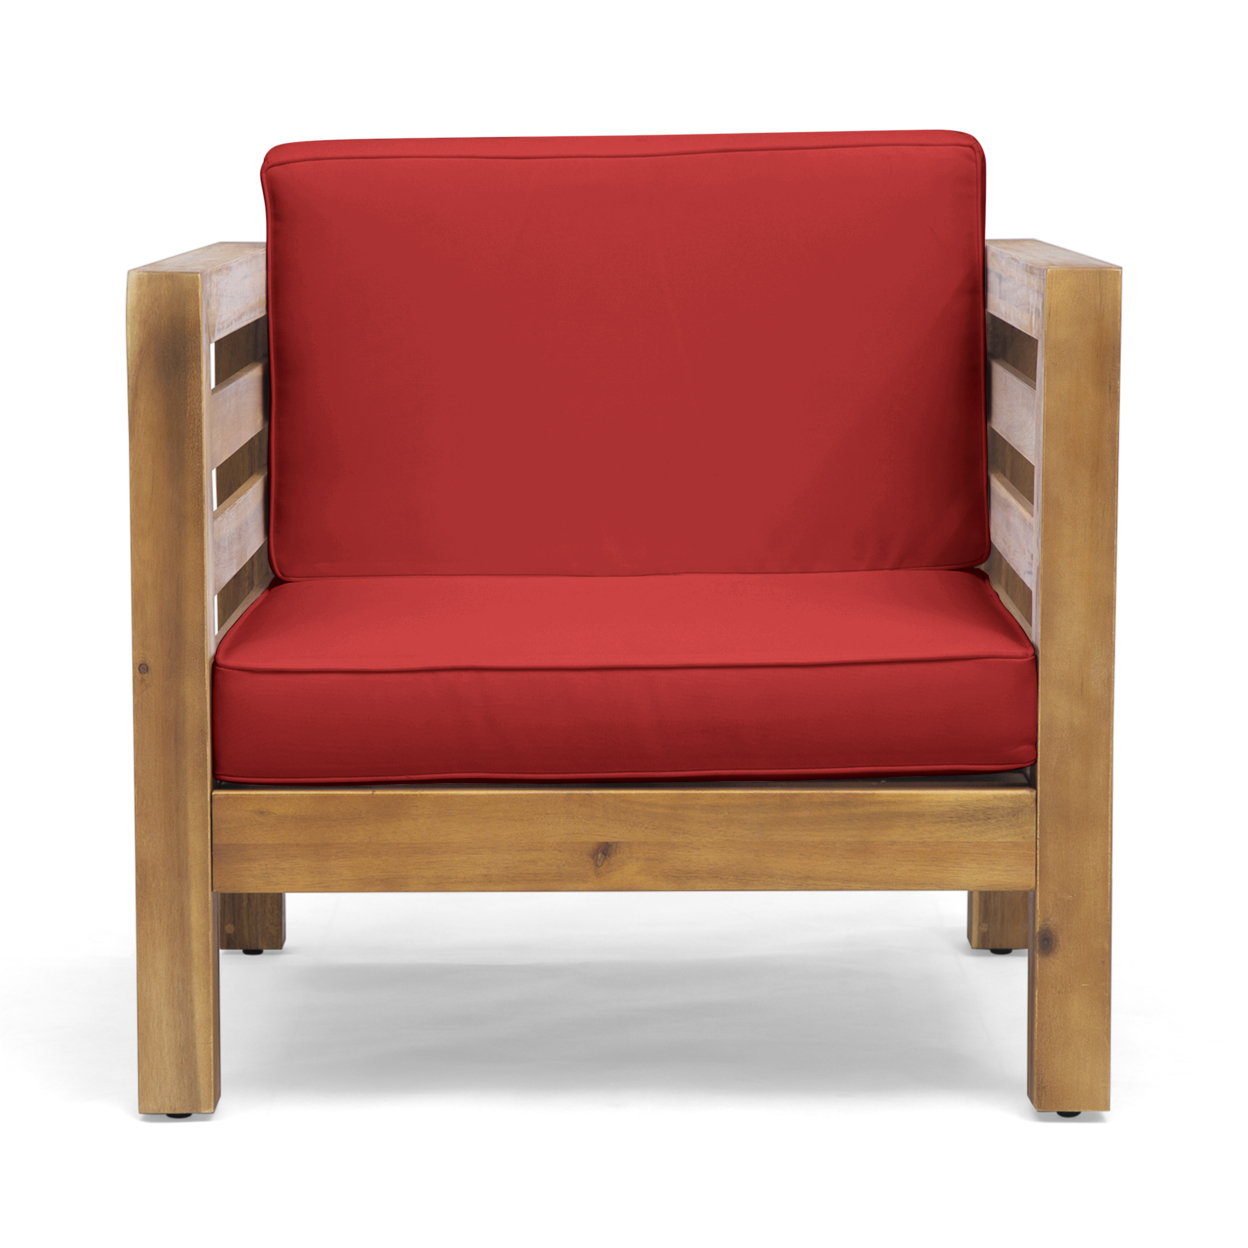 Louise Outdoor Acacia Wood Club Chair With Cushion - Teak Finish + Red